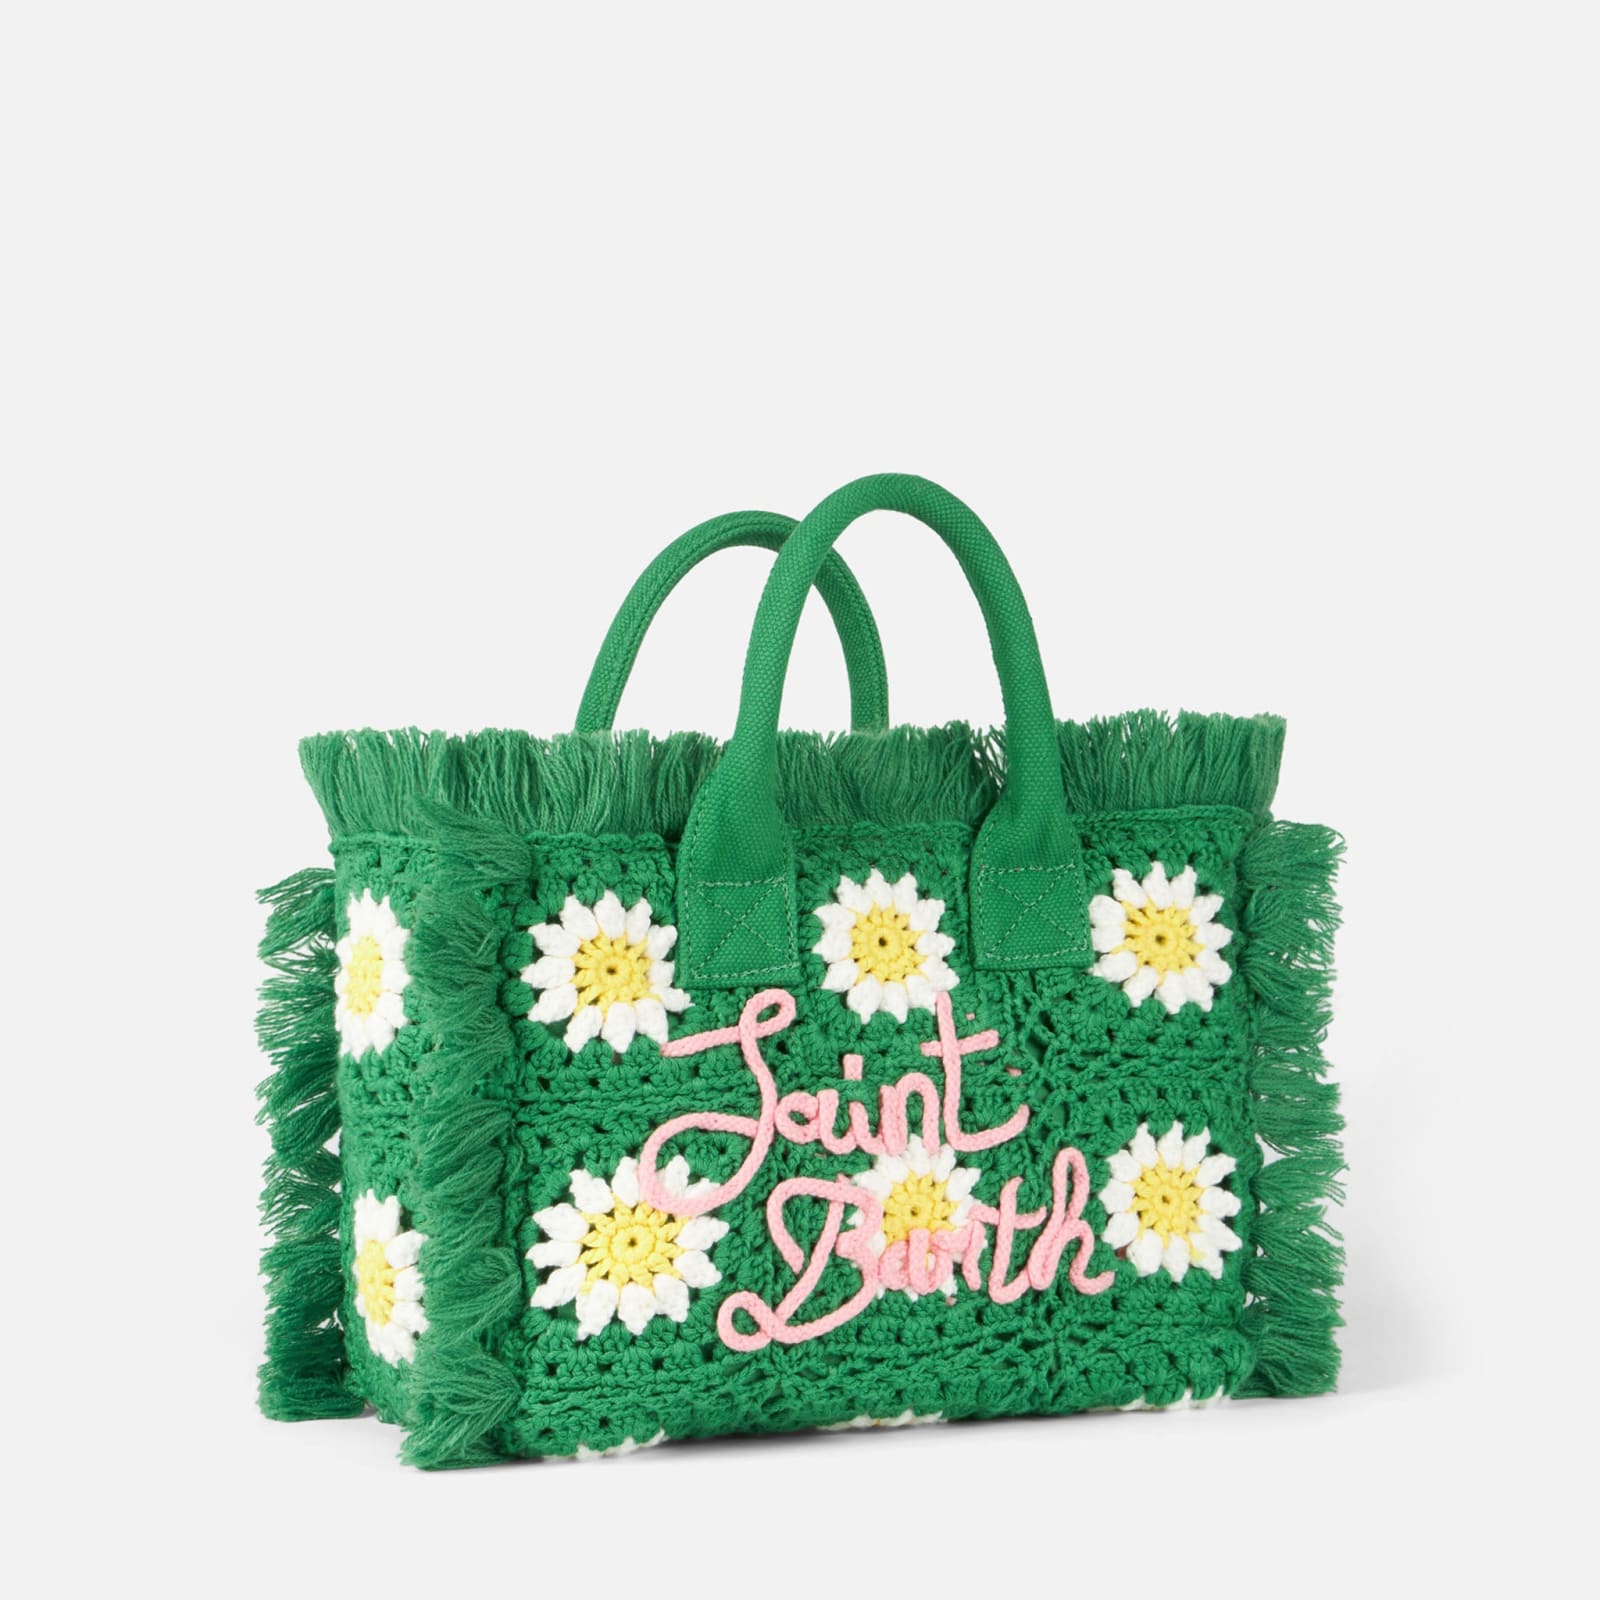 Shop Mc2 Saint Barth Colette Handbag With Crochet Flower Patches In Green